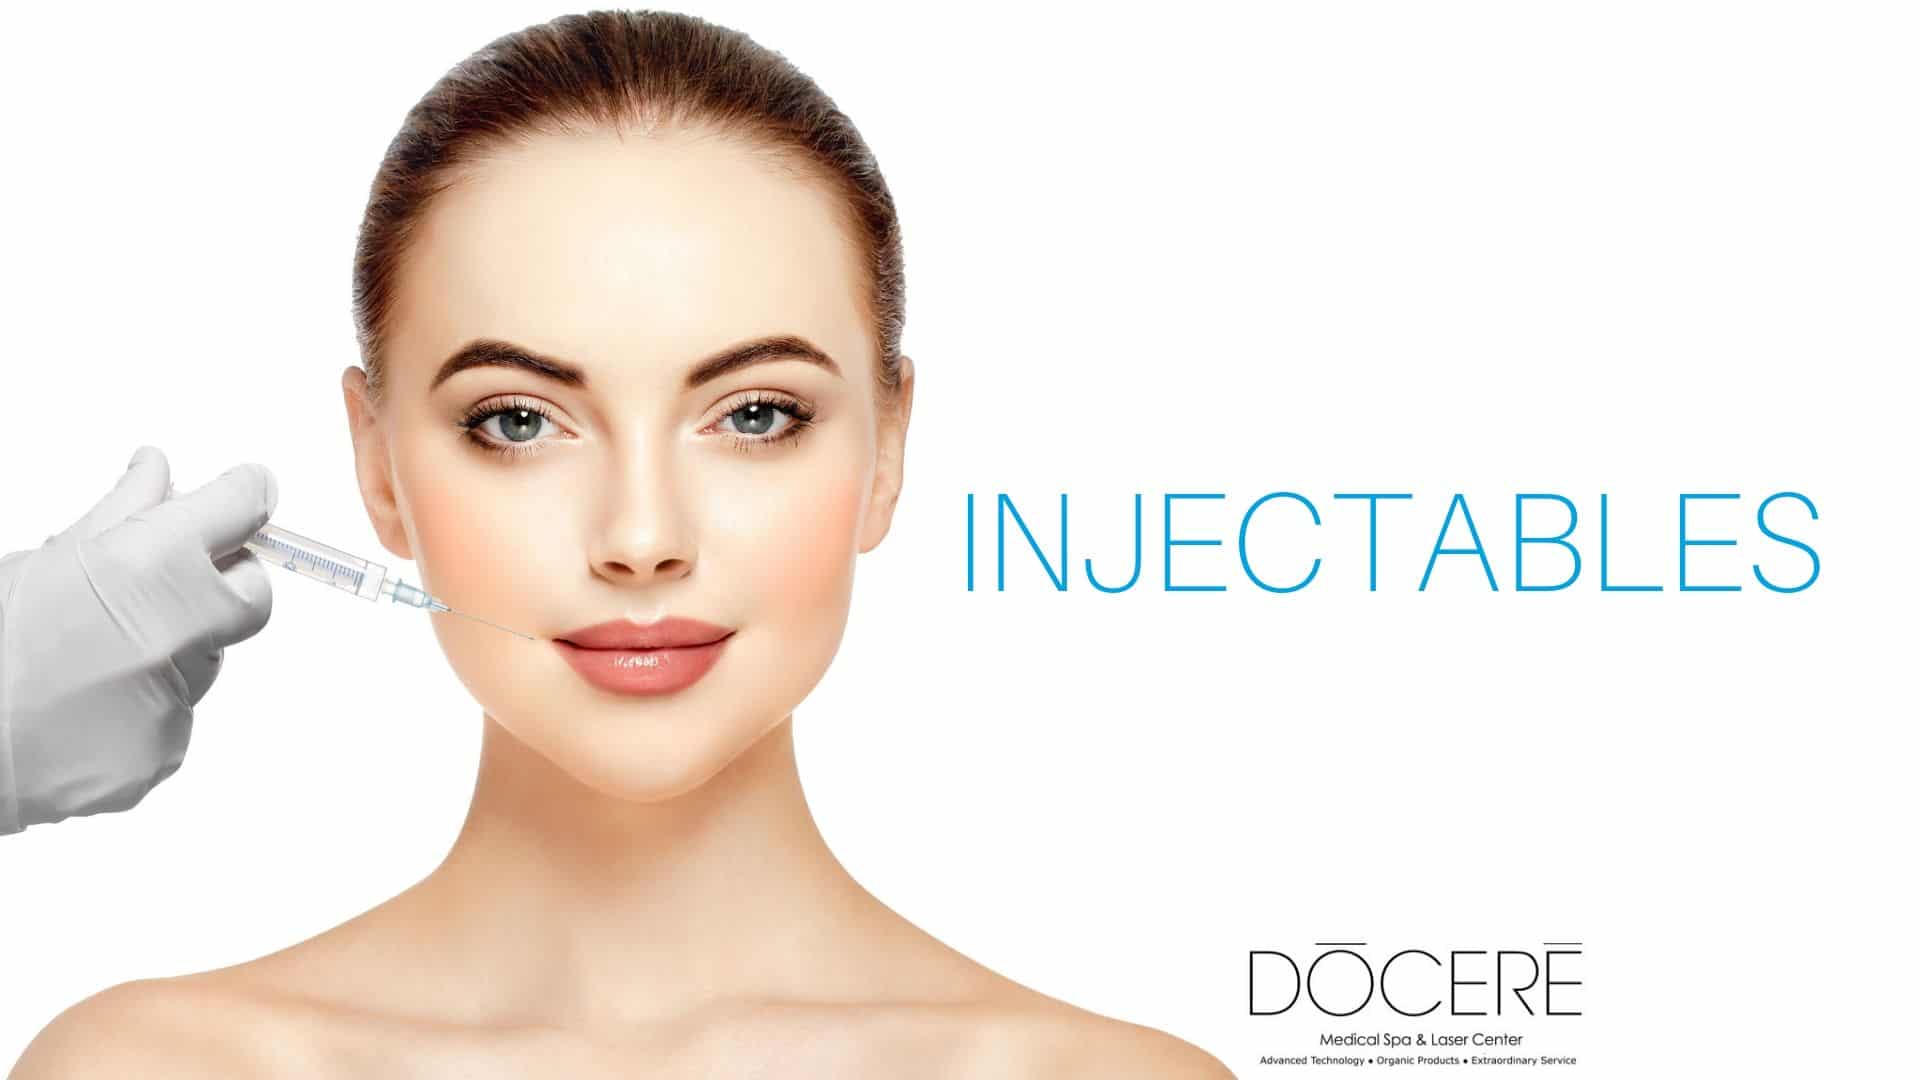 Woman receiving injectables from a specialist at Docere Medspa.